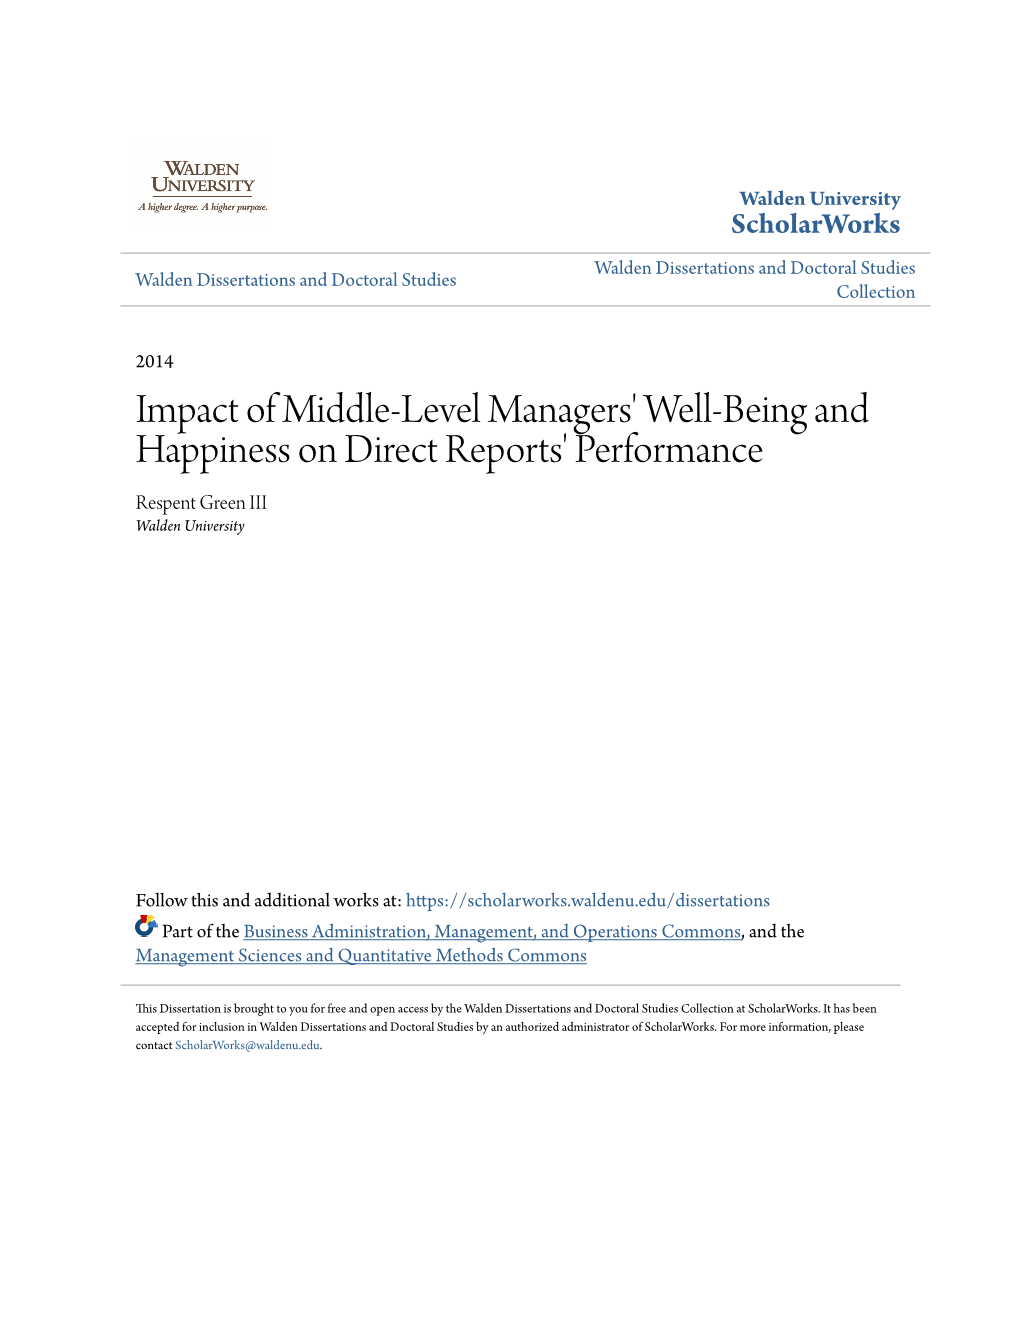 Impact of Middle-Level Managers' Well-Being and Happiness on Direct Reports' Performance Respent Green III Walden University